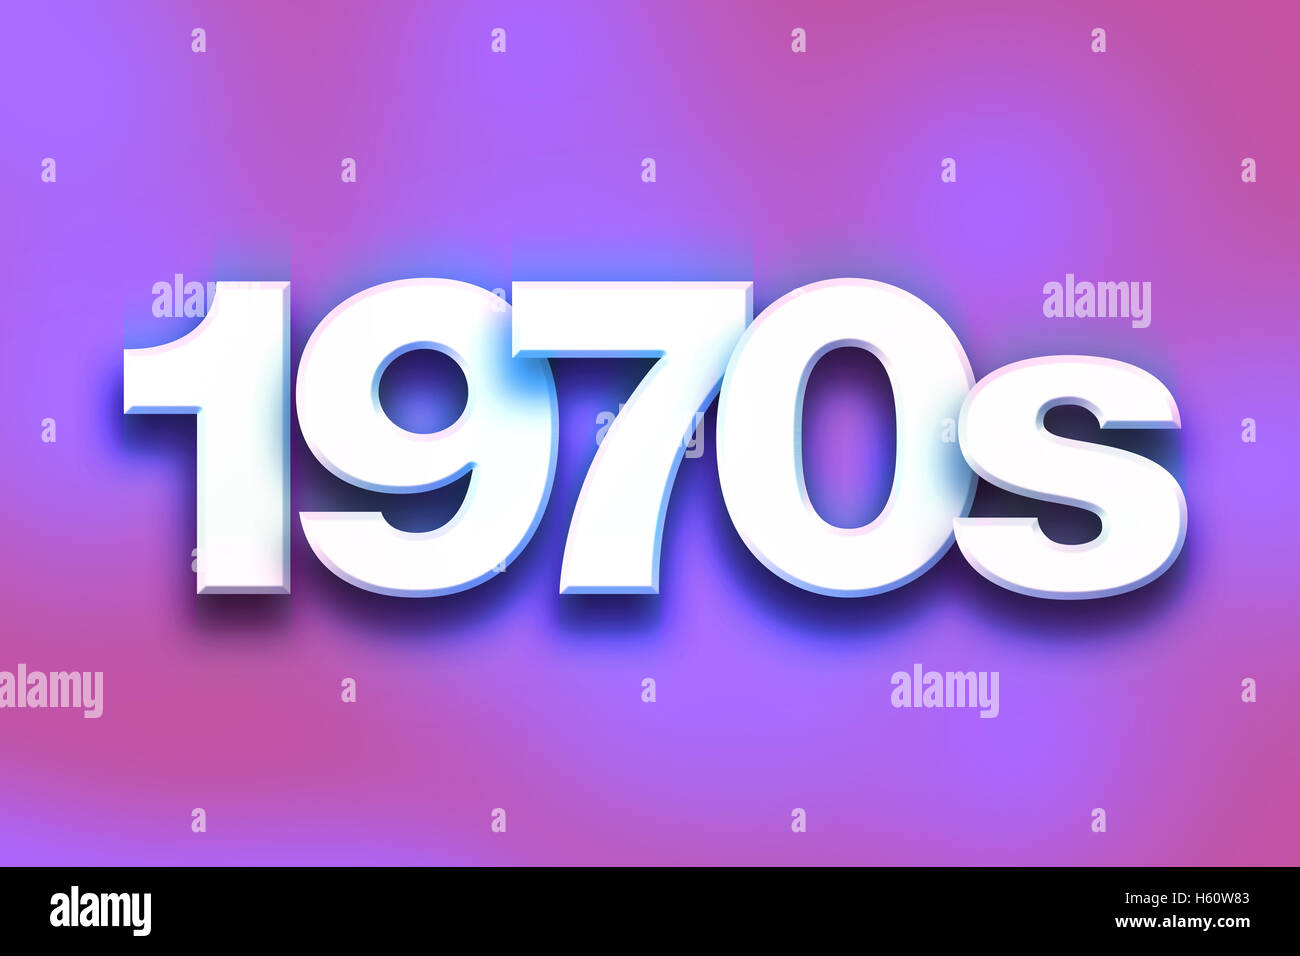 The word '1970s' written in white 3D letters on a colorful background concept and theme. Stock Photo